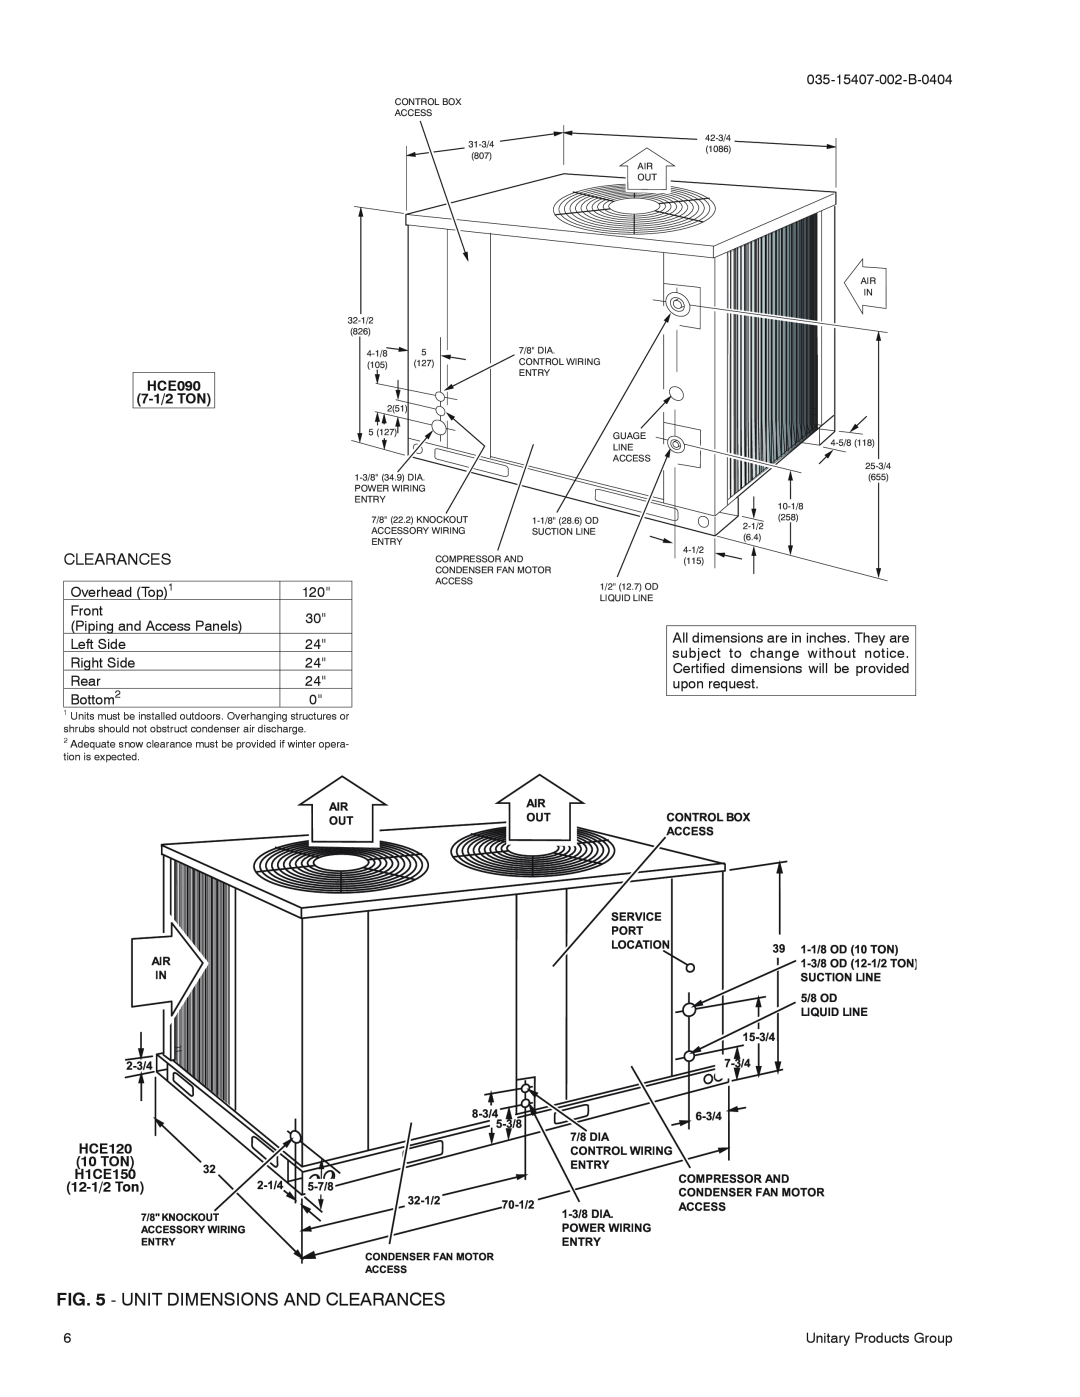 York H3CE120, H5CE090 installation manual Unit Dimensions And Clearances, HCE090, HCE120, 10 TON, H1CE150, 12-1/2Ton 